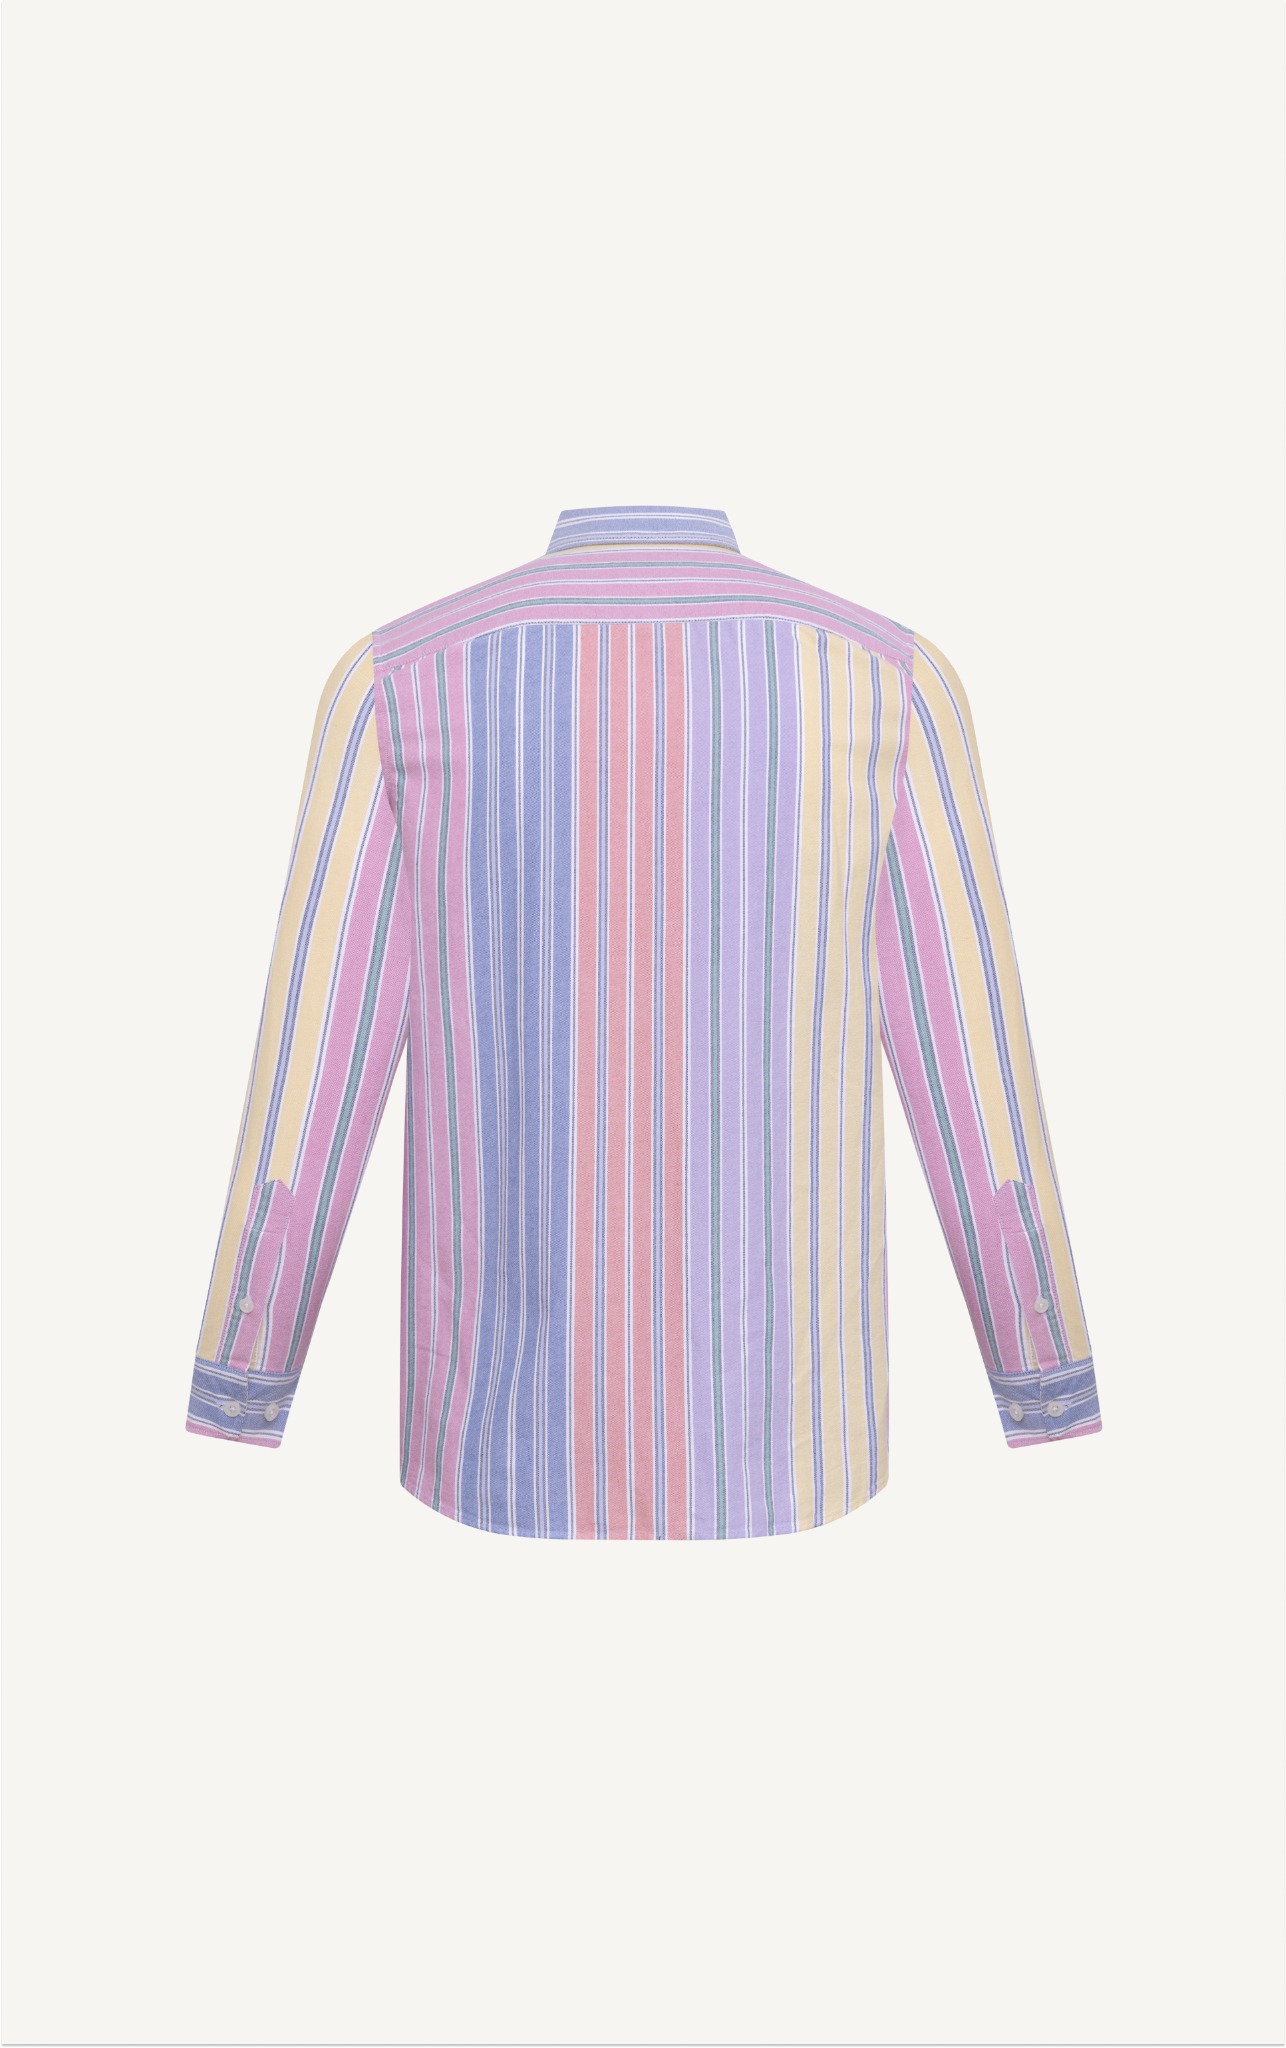 AG300 FACTORY REGULAR FIT MULTI-COLORED VERTICAL STRIPED SHIRT - YELLOW